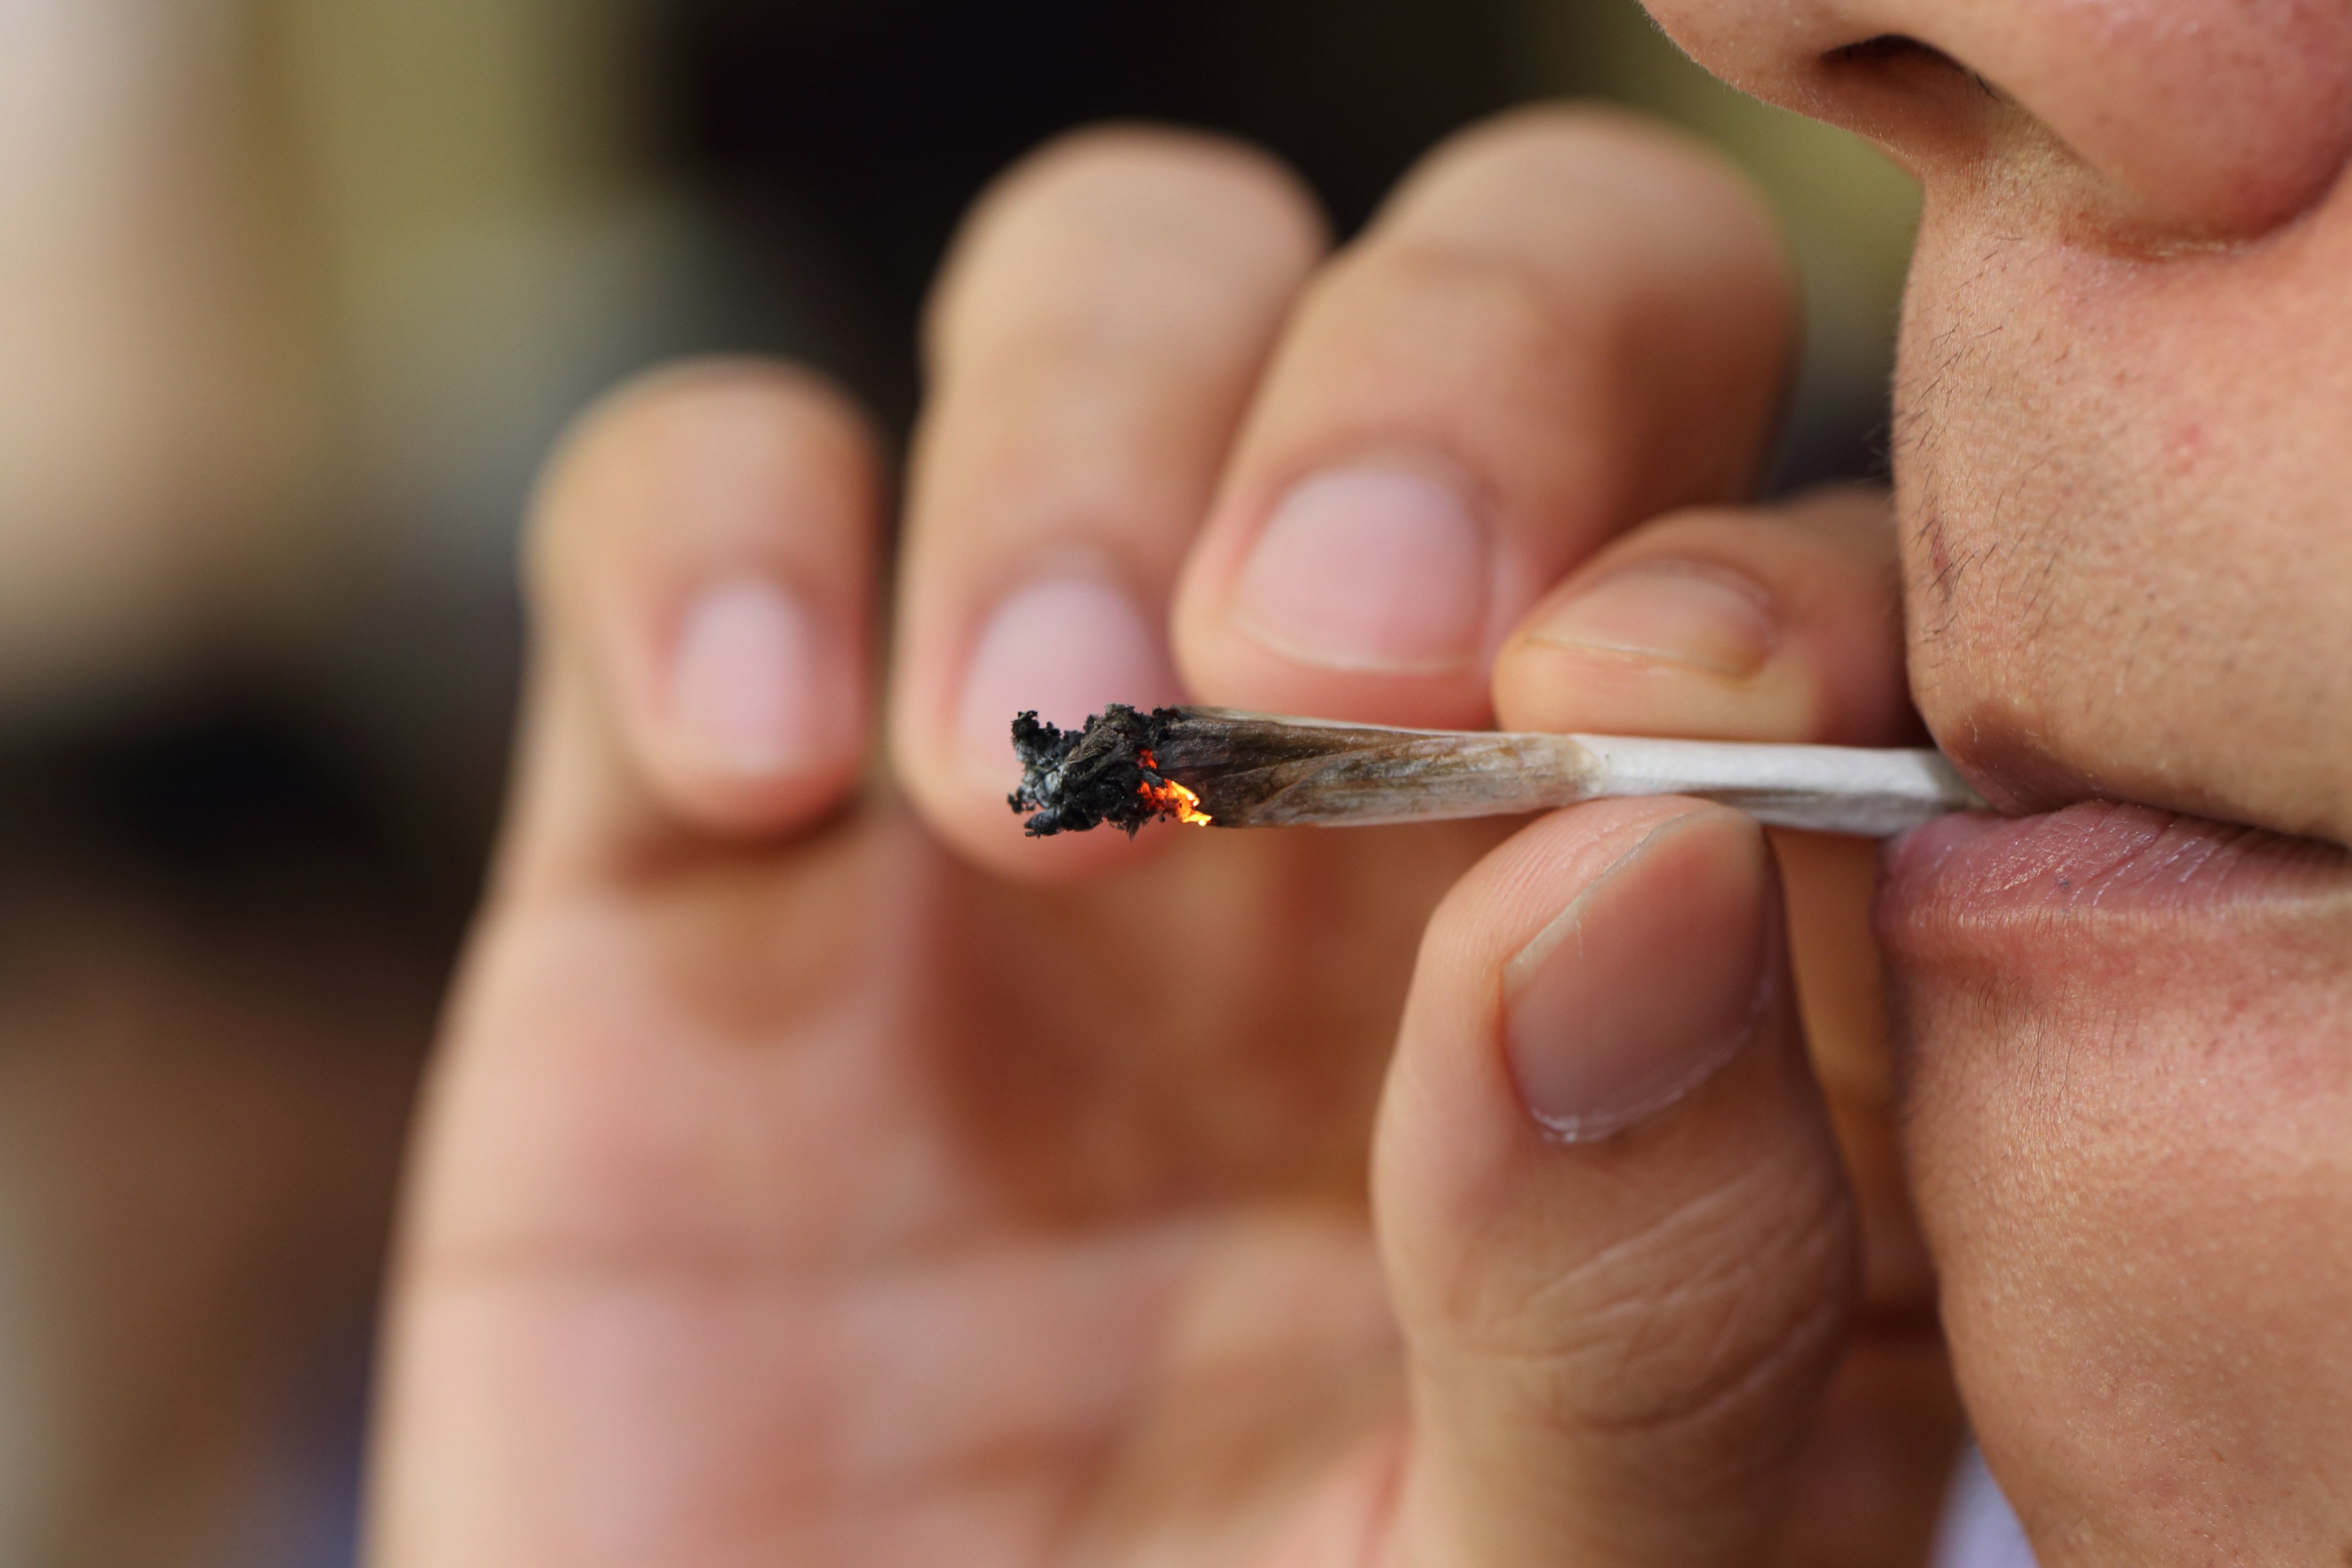 A recent study suggests smoking marijuana may do more damage to the lungs than smoking cigarettes. Photo: Shutterstock